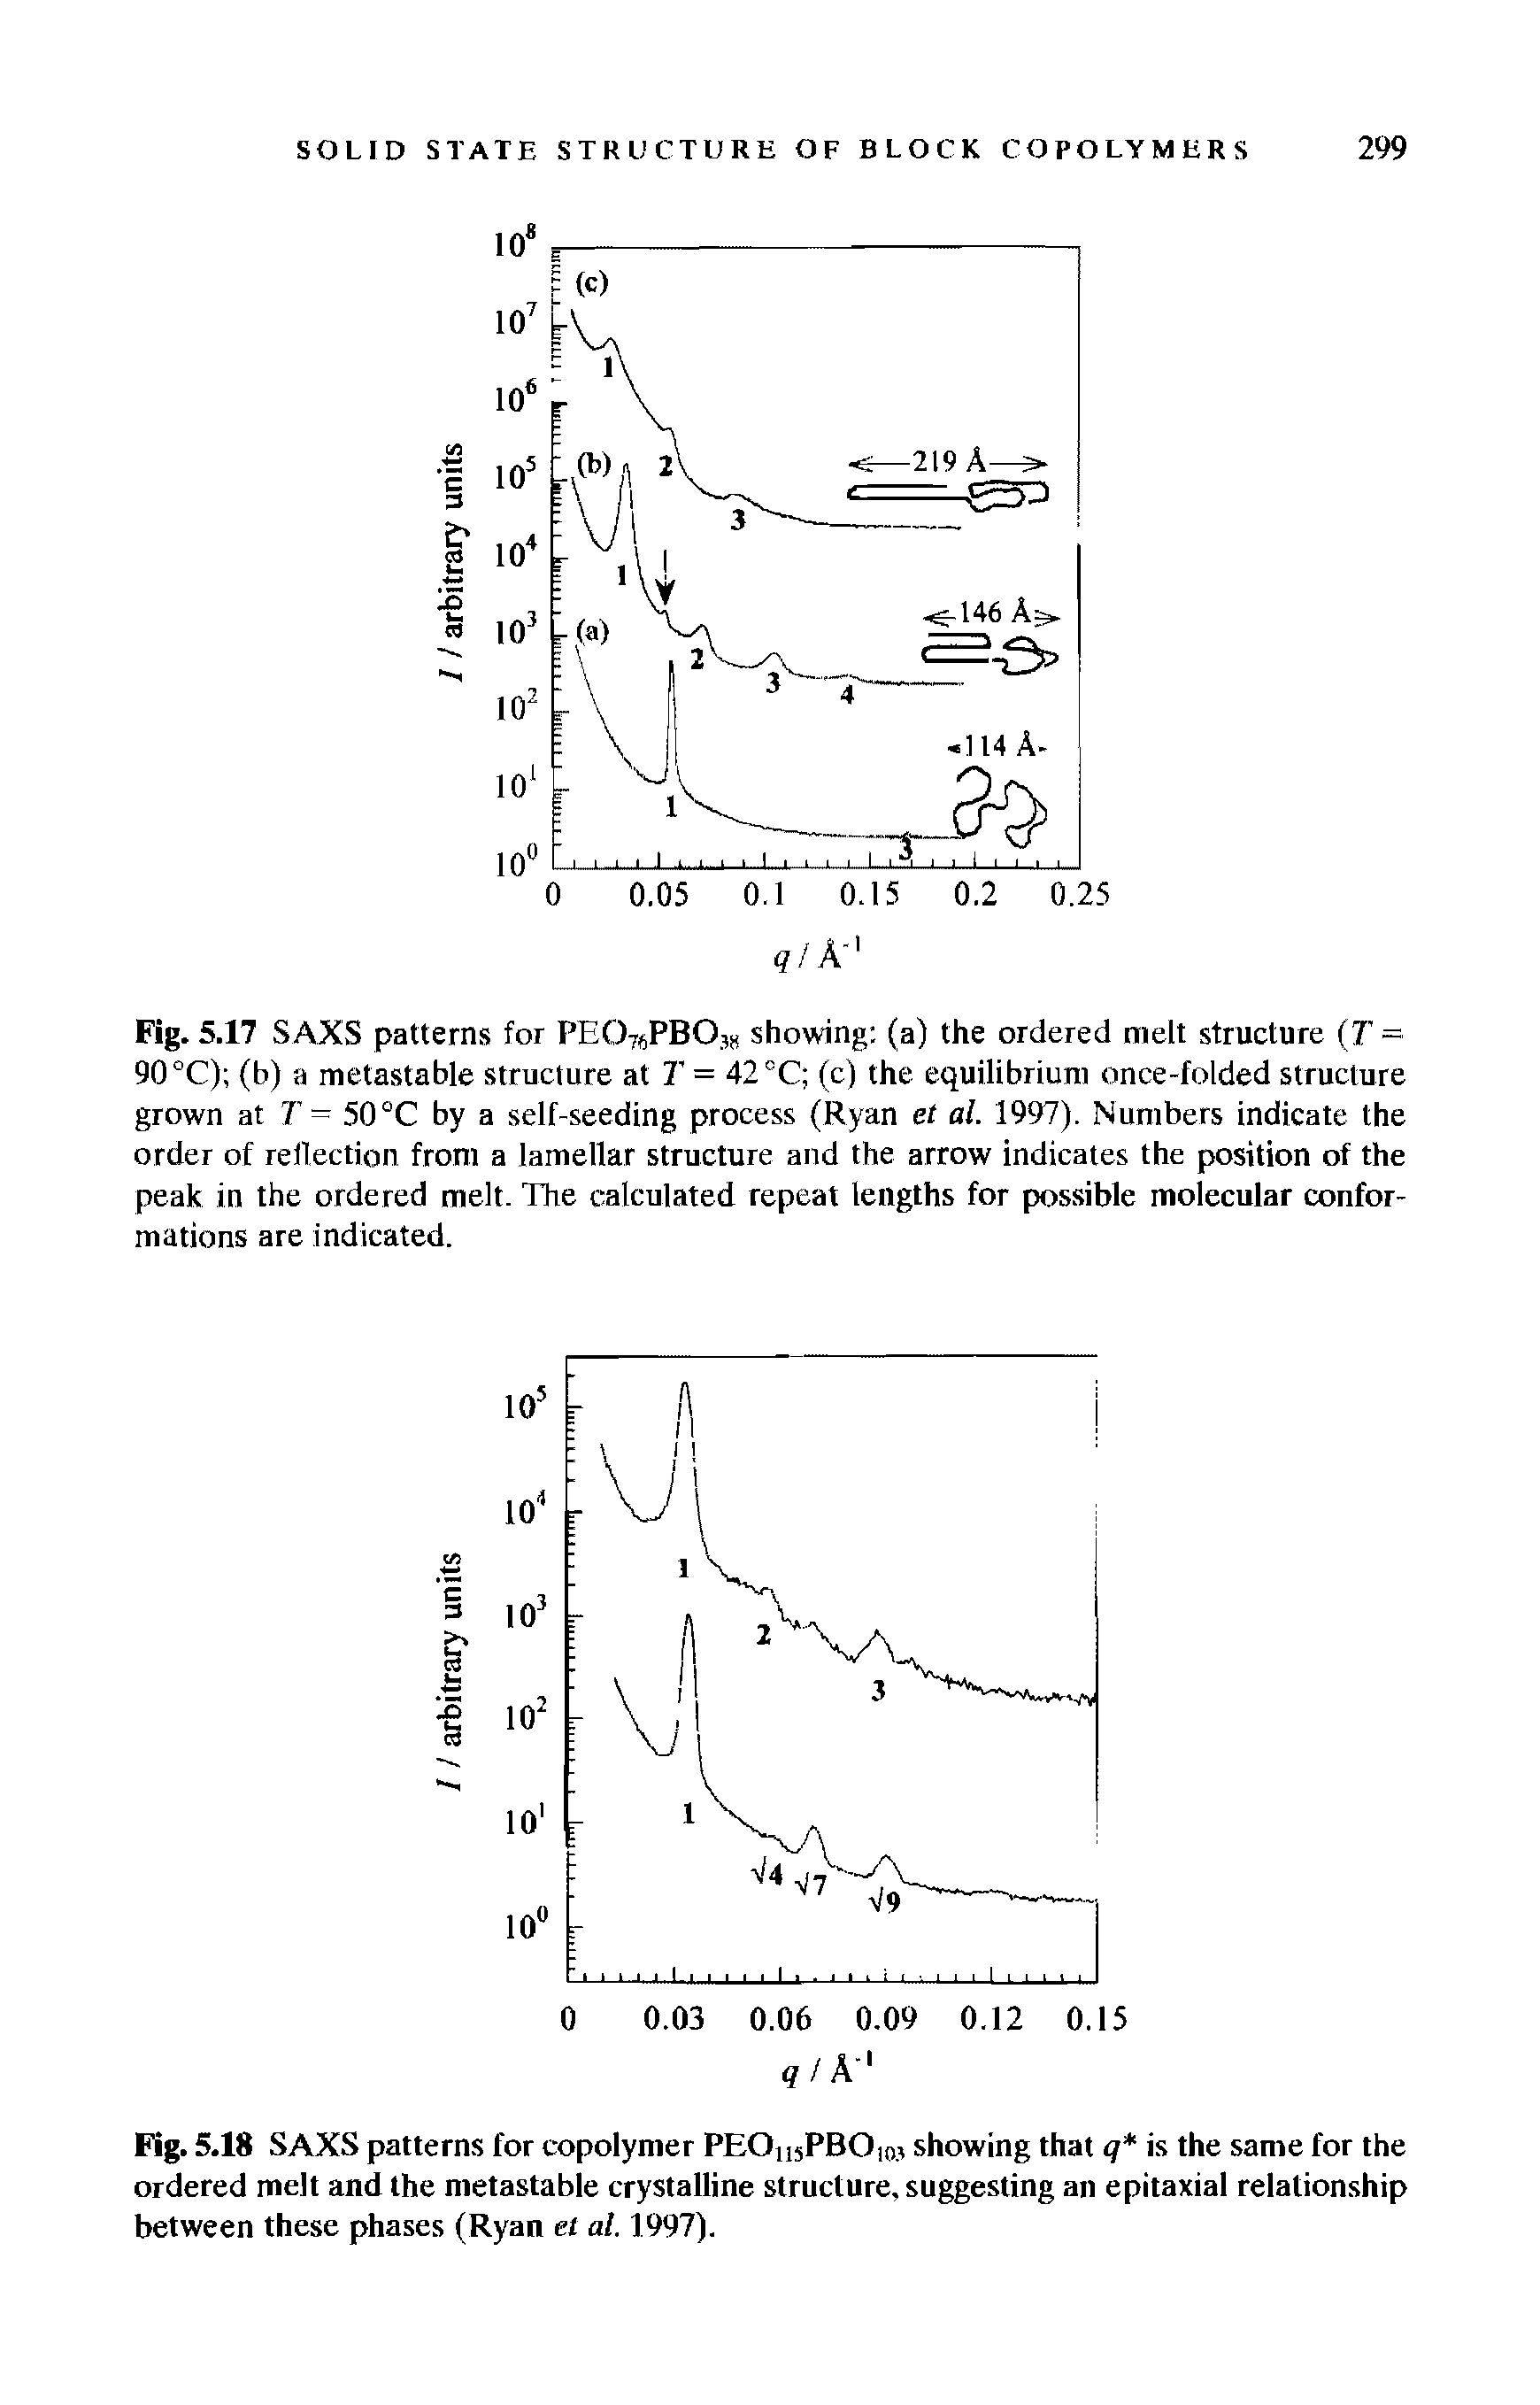 Fig. 5.18 SAXS patterns for copolymer PBOmPBOln3 showing that q is the same for the ordered melt and the metastable crystalline structure, suggesting an epitaxial relationship between these phases (Ryan el al. 1997).